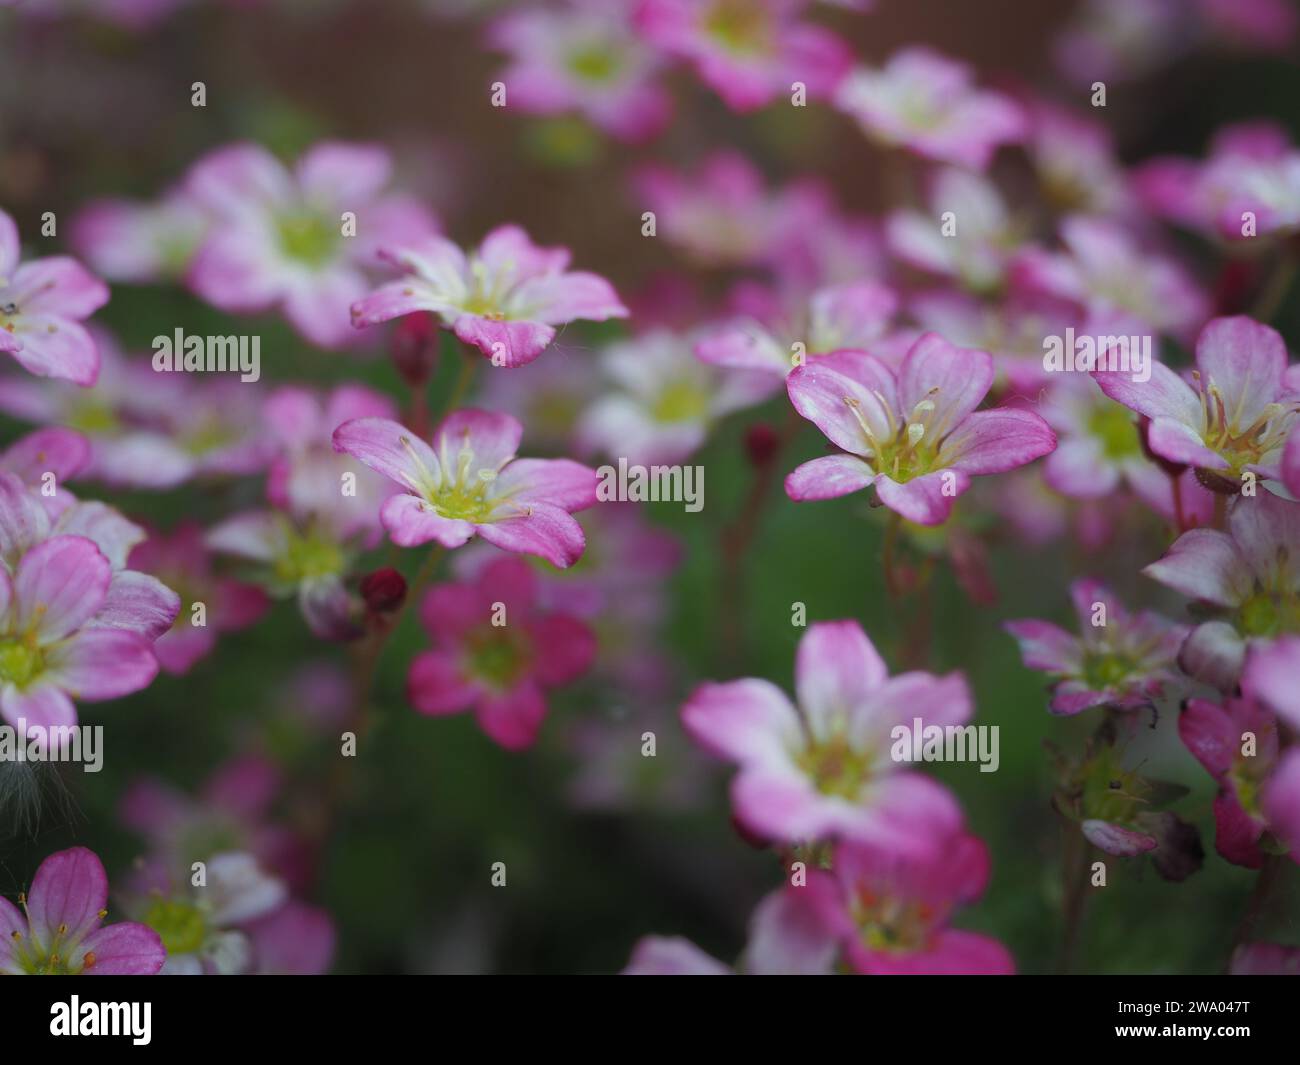 Up close with pink saxifrage Stock Photo